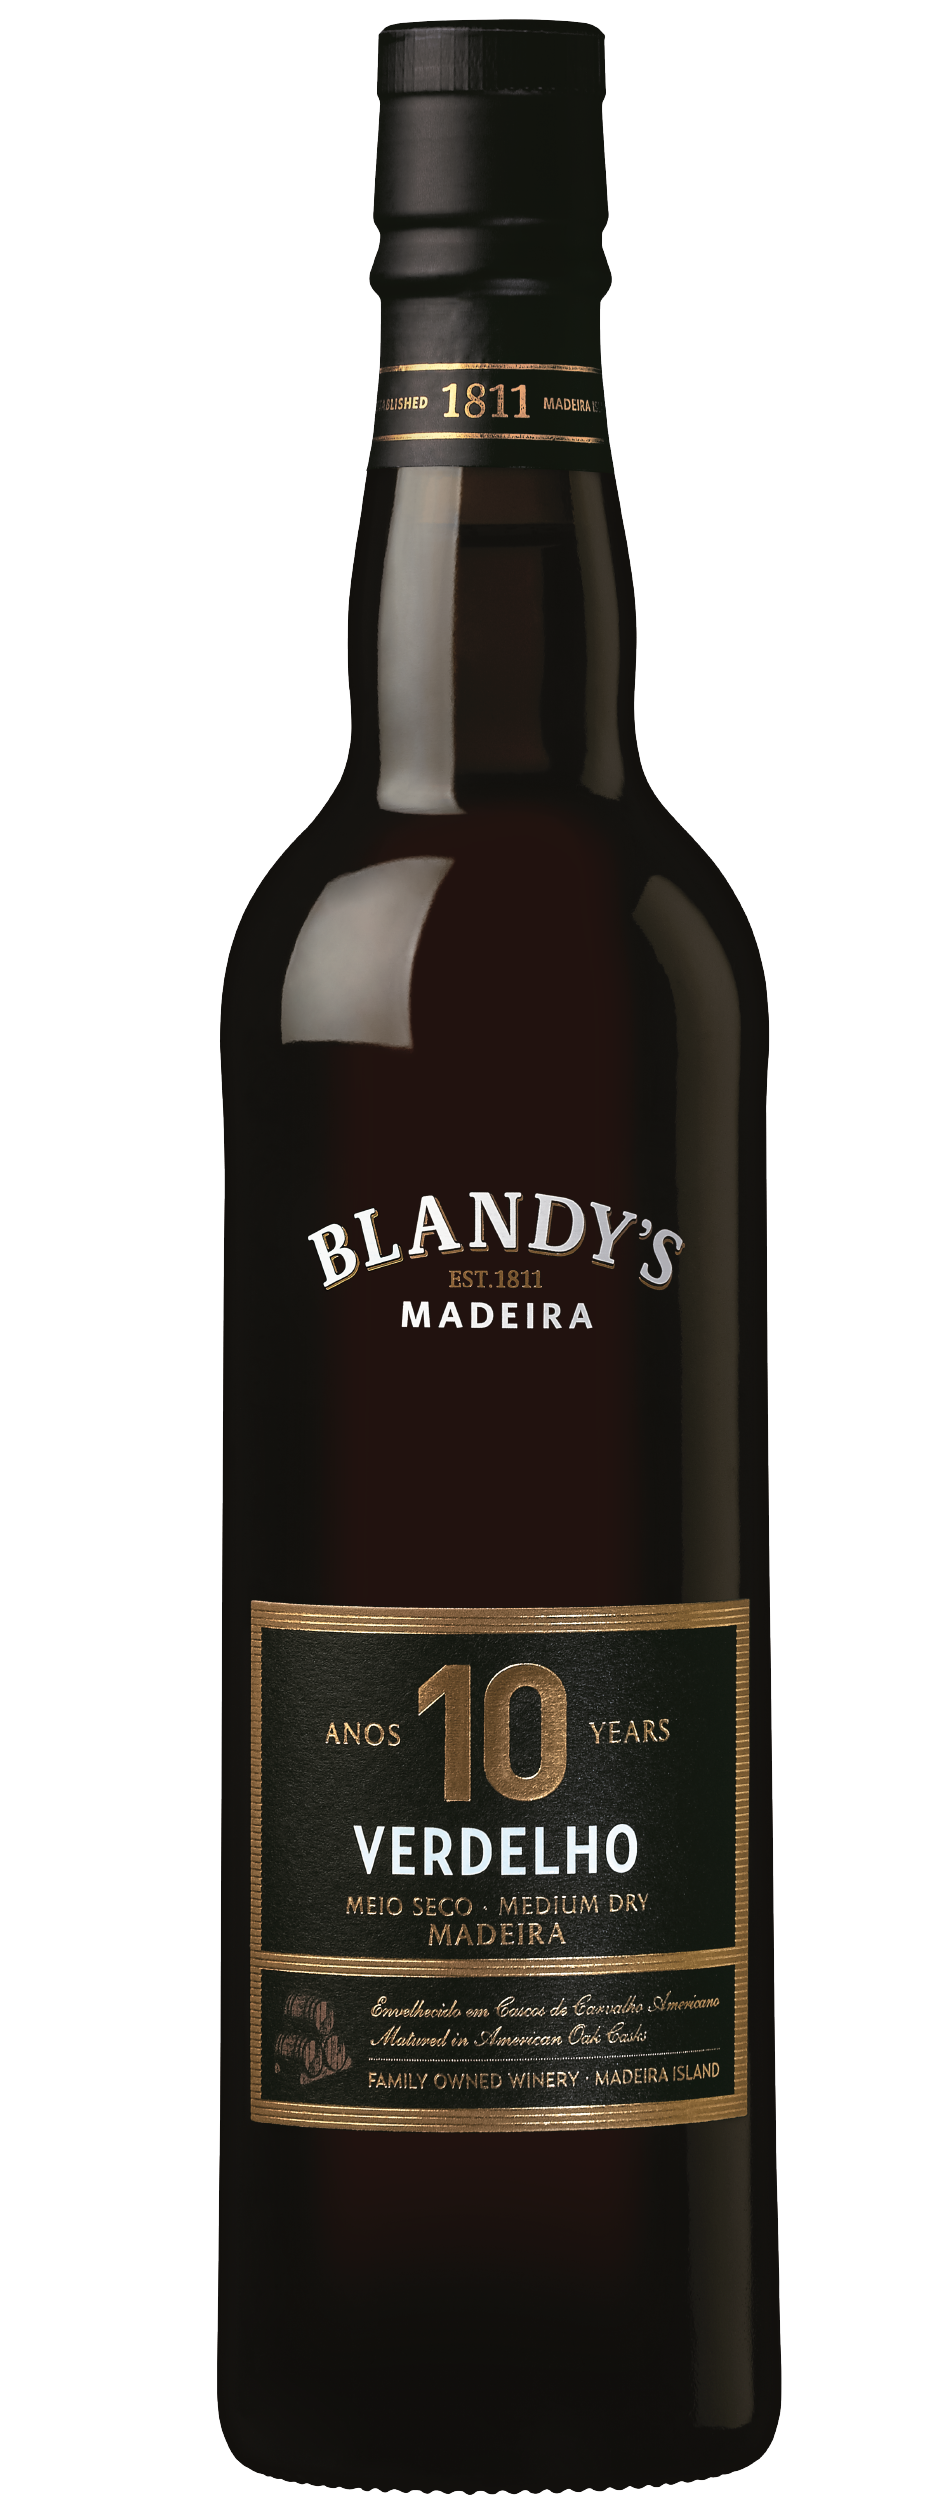 Product Image for BLANDY'S VERDELHO 10 YEAR OLD